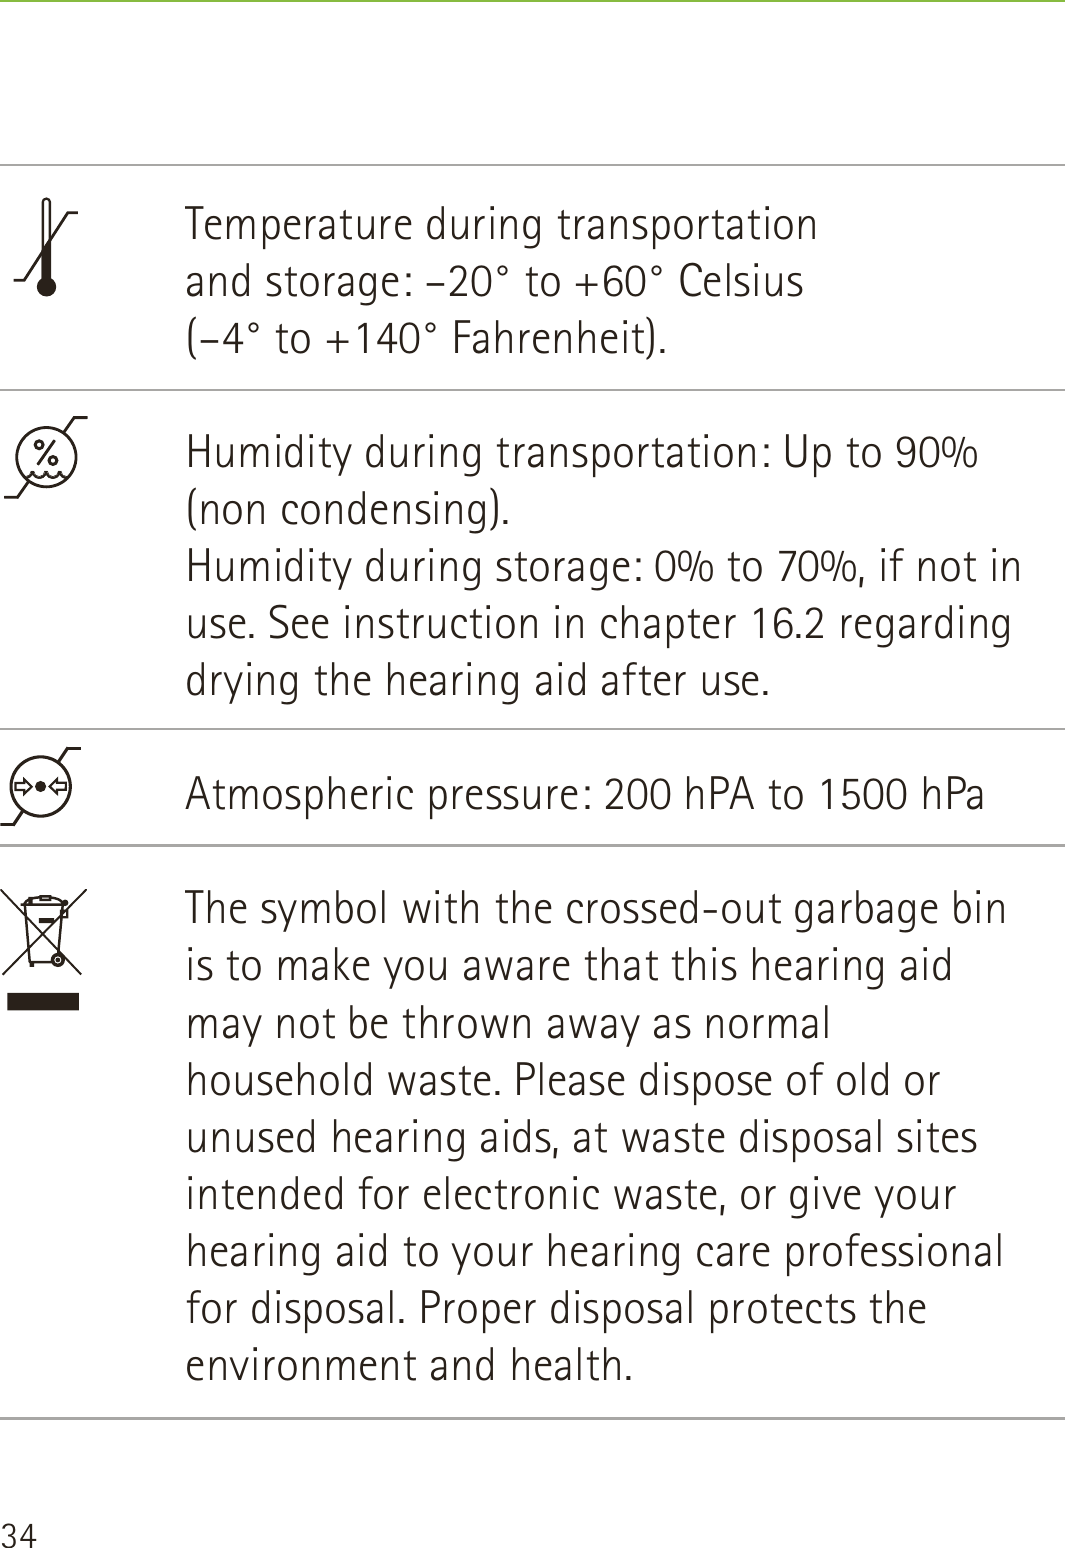 34Temperature during transportation  and storage: –20° to +60° Celsius  (–4° to +140° Fahrenheit).Humidity during transportation: Up to 90% (non condensing). Humidity during storage: 0% to 70%, if not in use. See instruction in chapter 16.2 regarding drying the hearing aid after use. Atmospheric pressure: 200 hPA to 1500 hPaThe symbol with the crossed-out garbage bin is to make you aware that this hearing aid may not be thrown away as normal household waste. Please dispose of old or unused hearing aids, at waste disposal sites intended for electronic waste, or give your hearing aid to your hearing care professional for disposal. Proper disposal protects the environment and health.